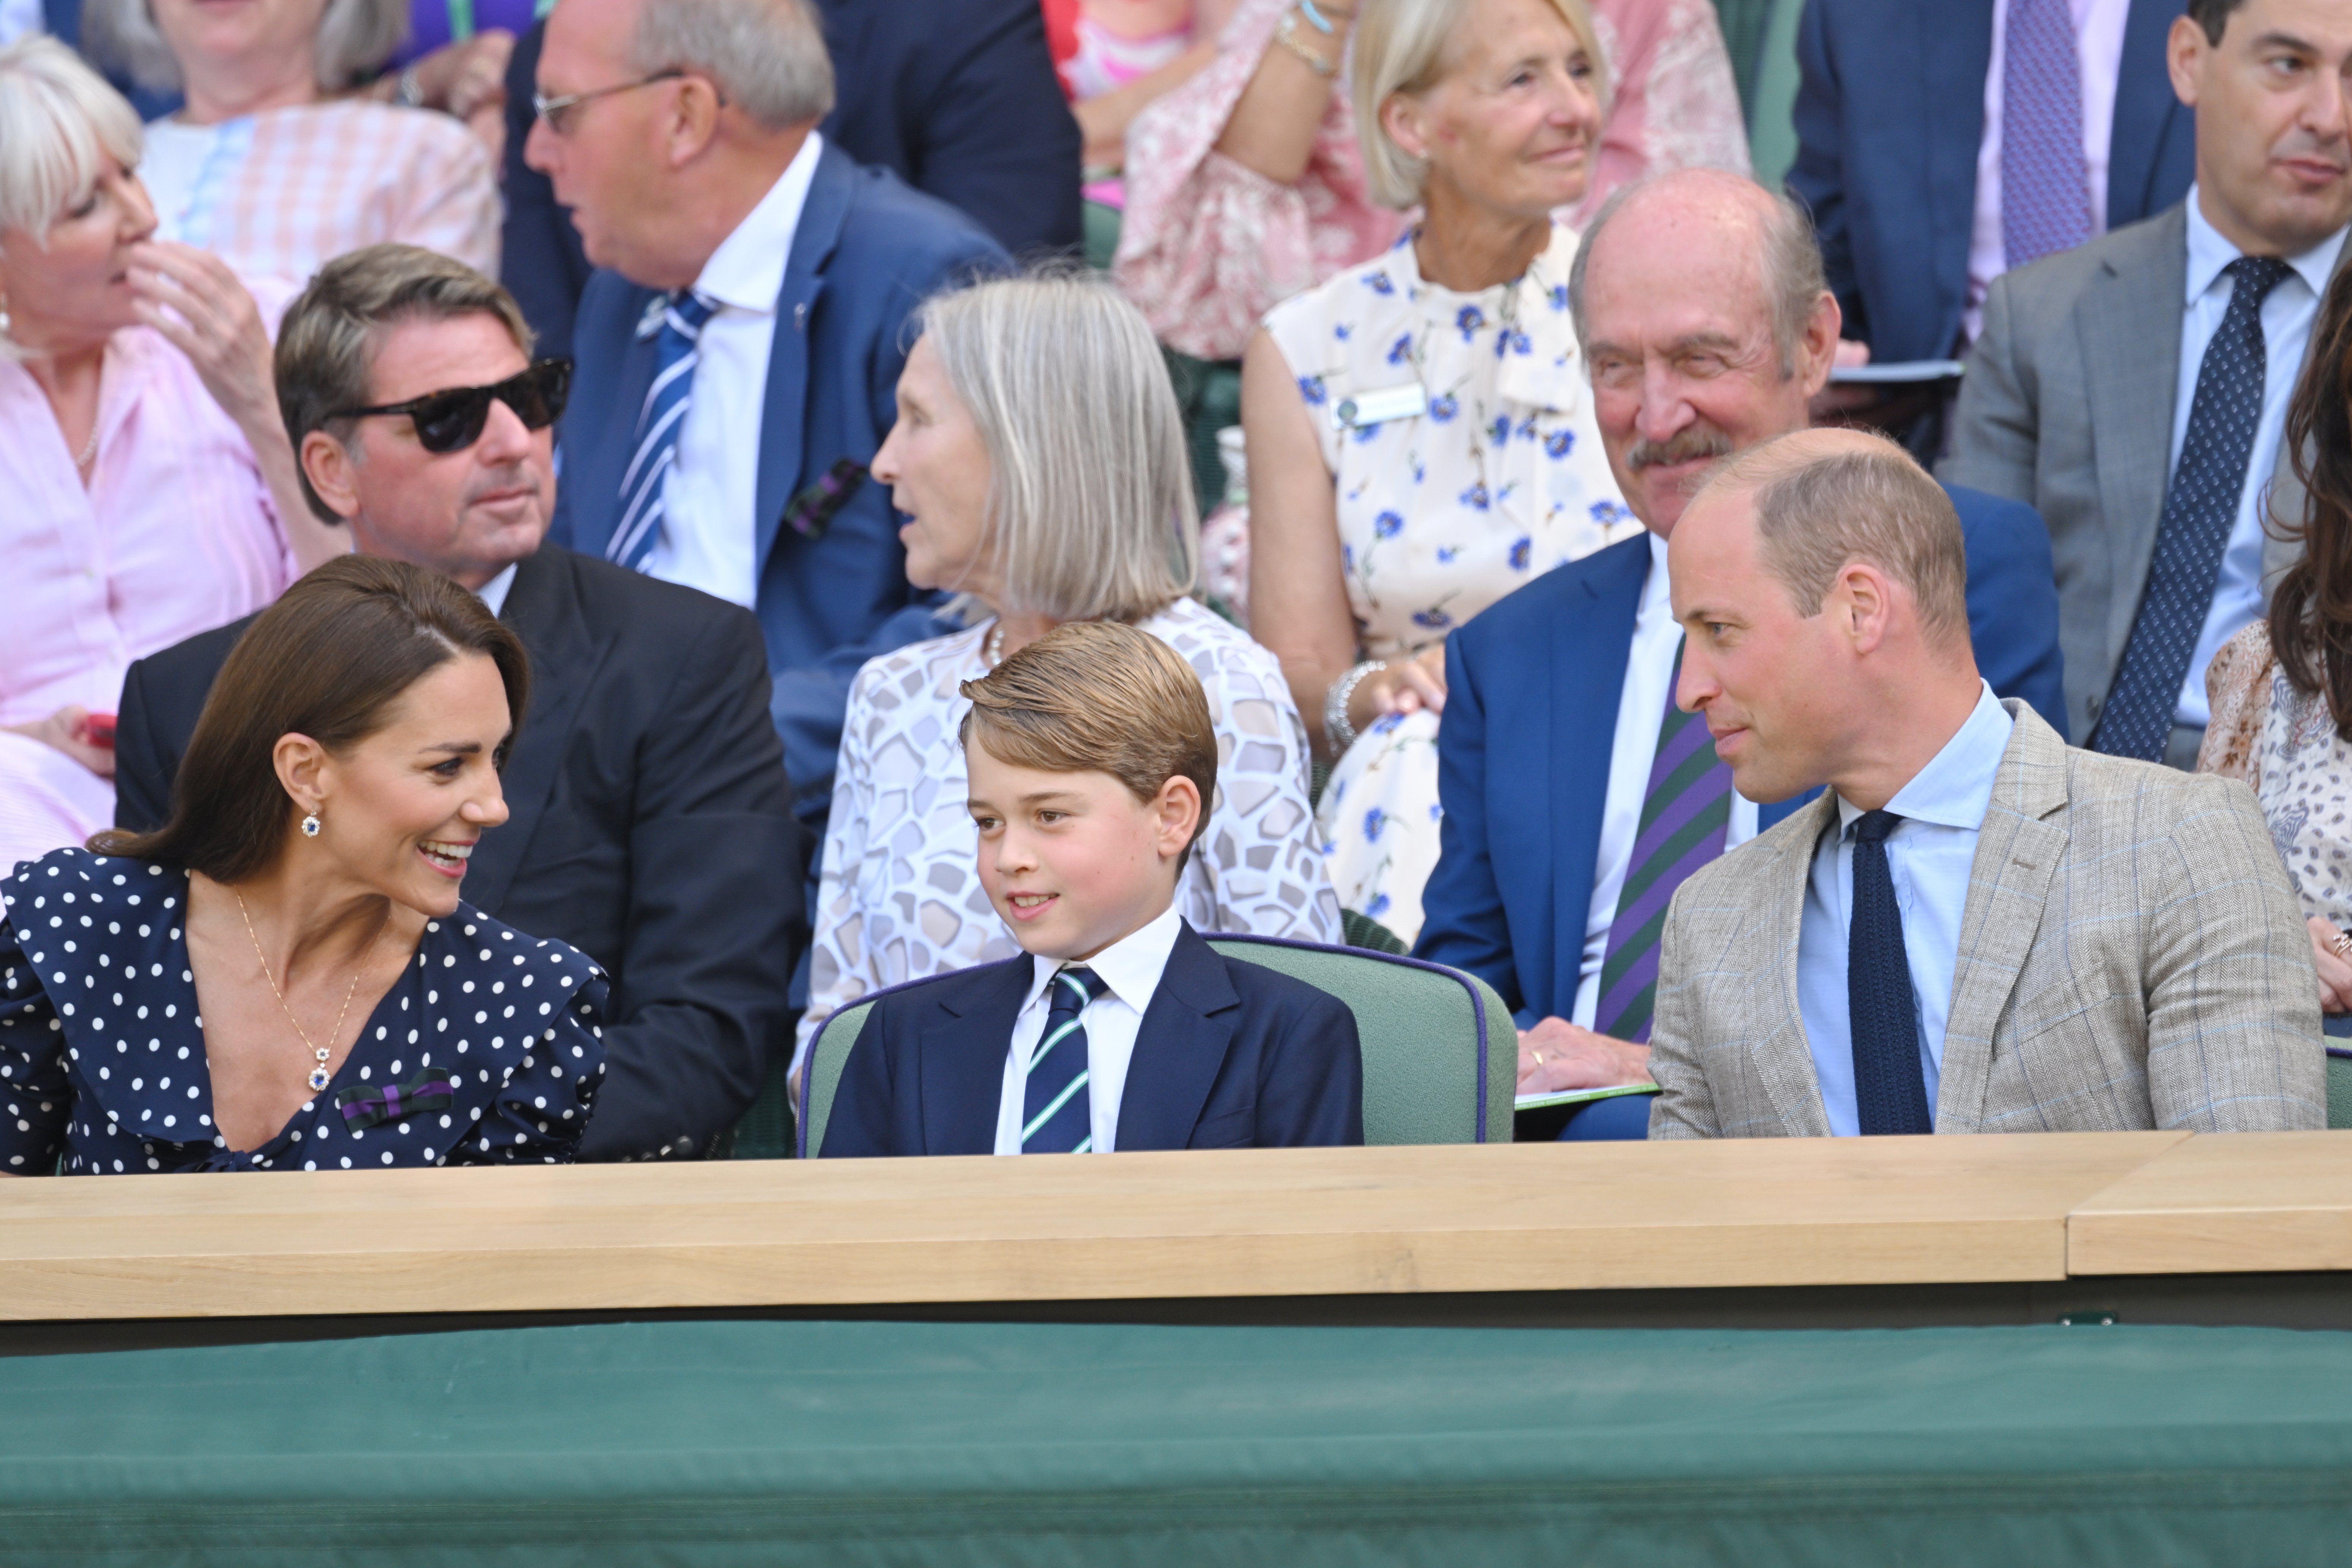 Kate Middleton pictured with her son Prince George and husband Prince William during The Wimbledon Men's Singles Final at the All England Lawn Tennis and Croquet Club on July 10, 2022 in London, England. Source:︳Getty Images